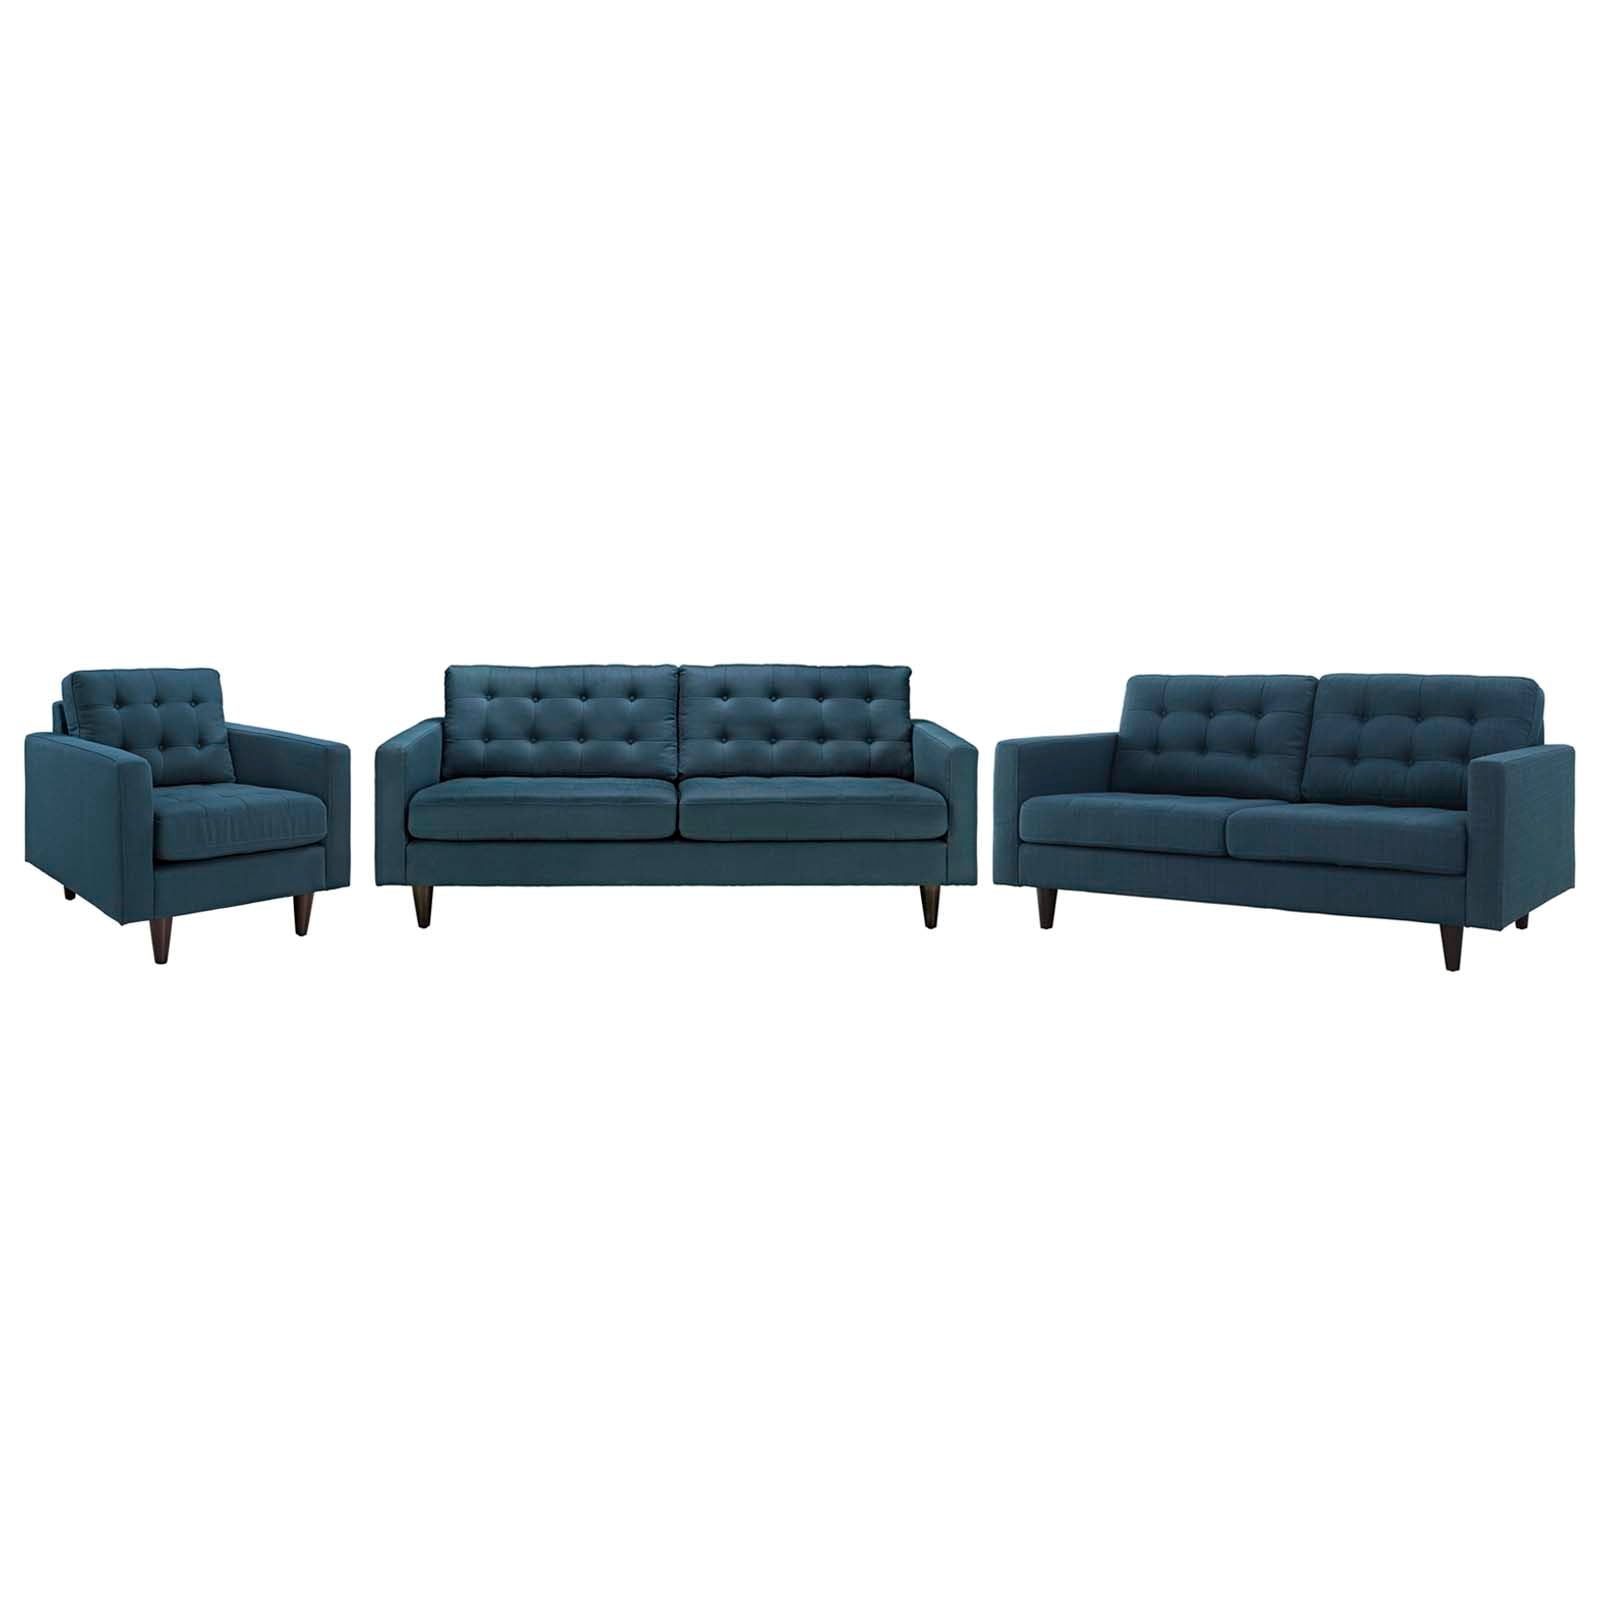 Modway Sofas & Couches - Empress-Sofa,-Loveseat-and-Armchair-Set-of-3-Azure